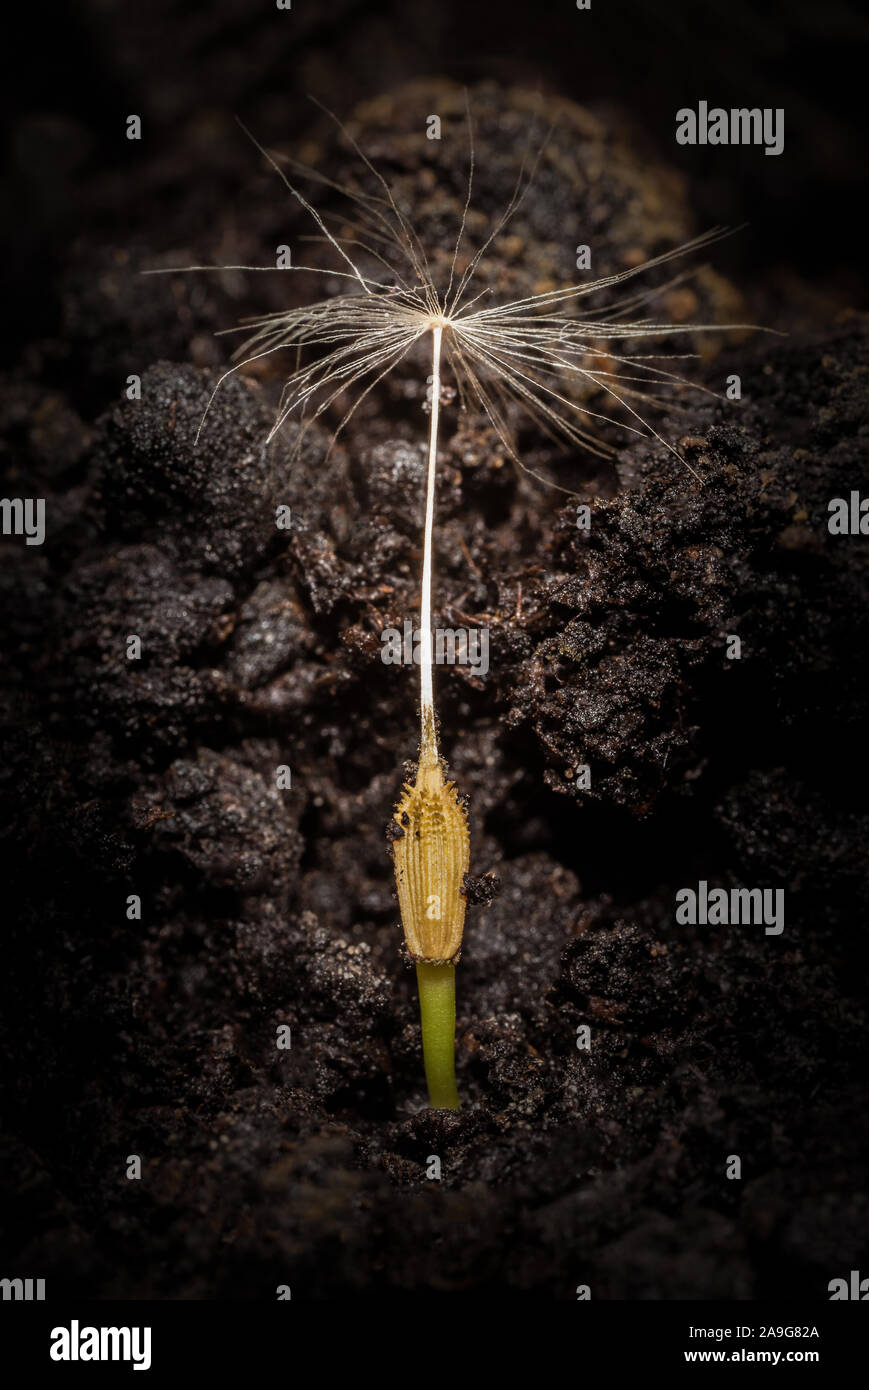 Macro image of a dandelion seed which has germinated with new root going into the ground Stock Photo